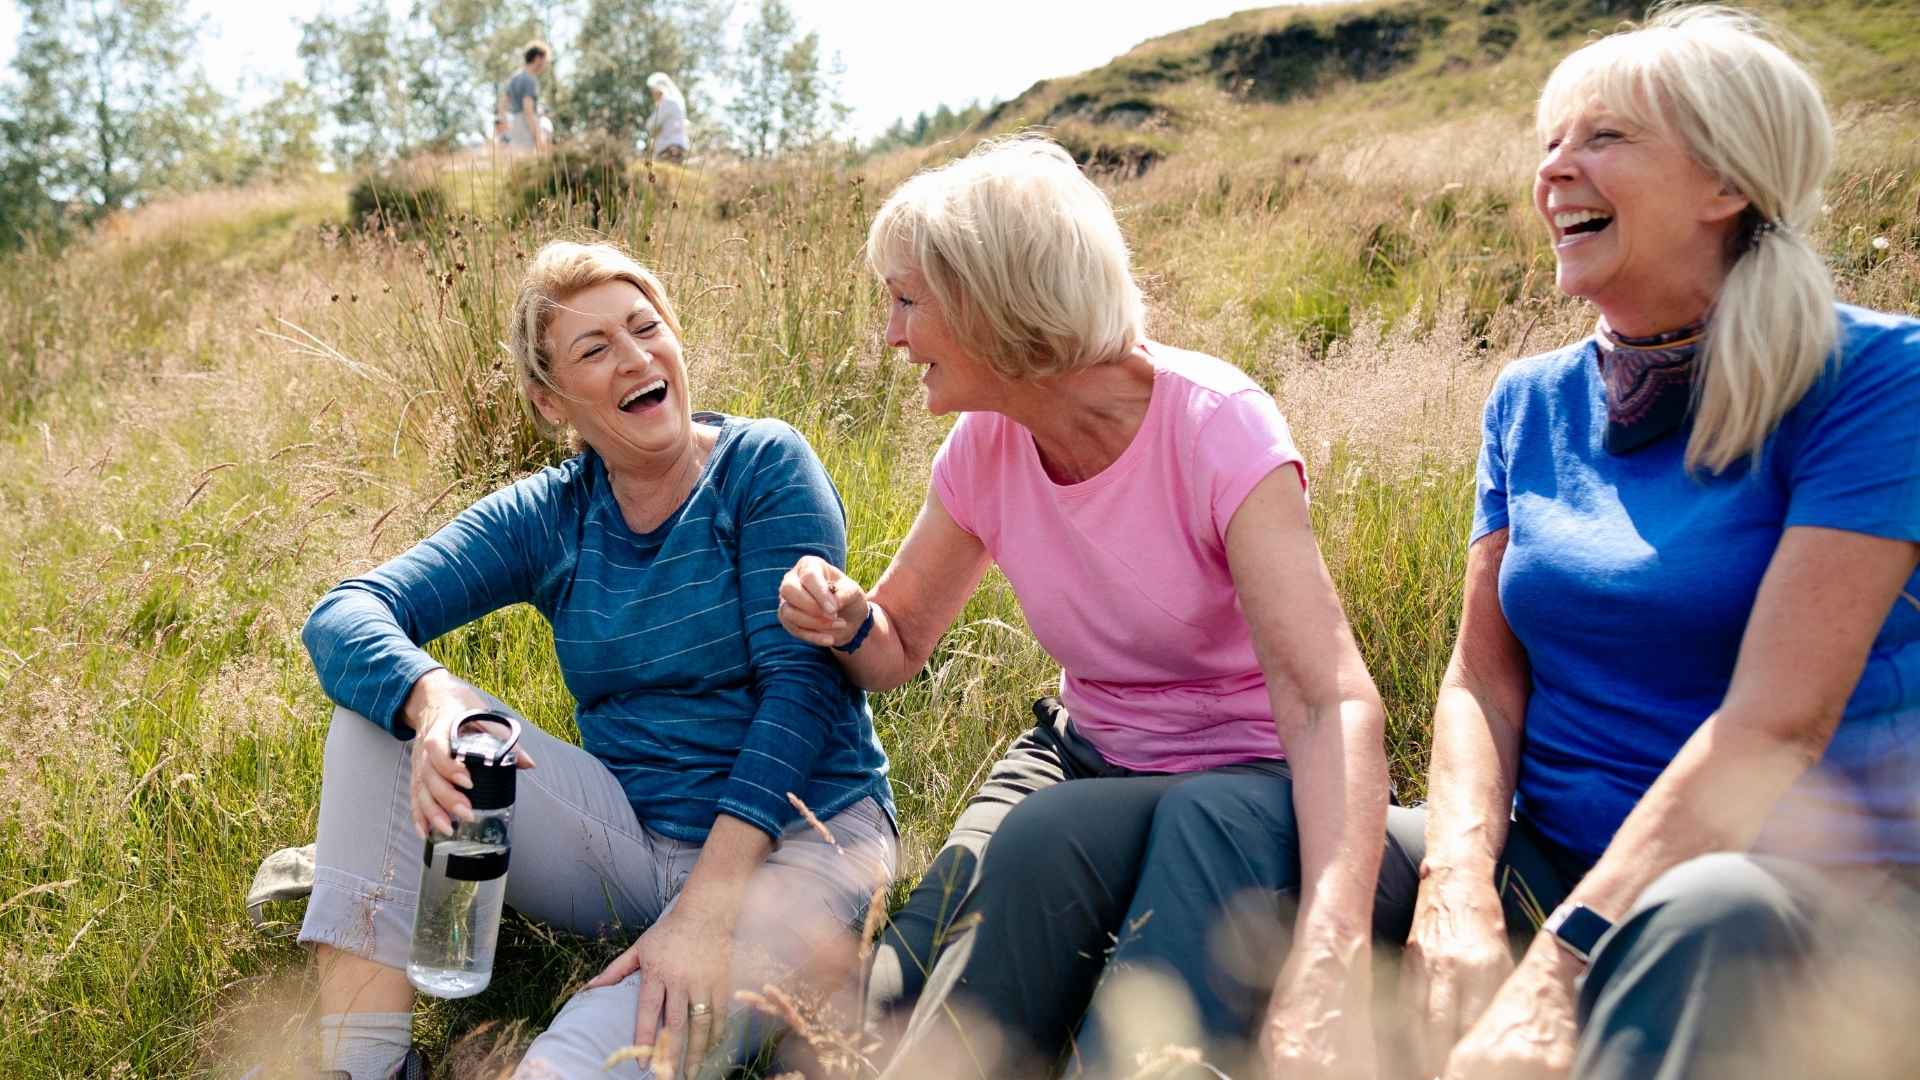 Women taking a break form hiking and laughing